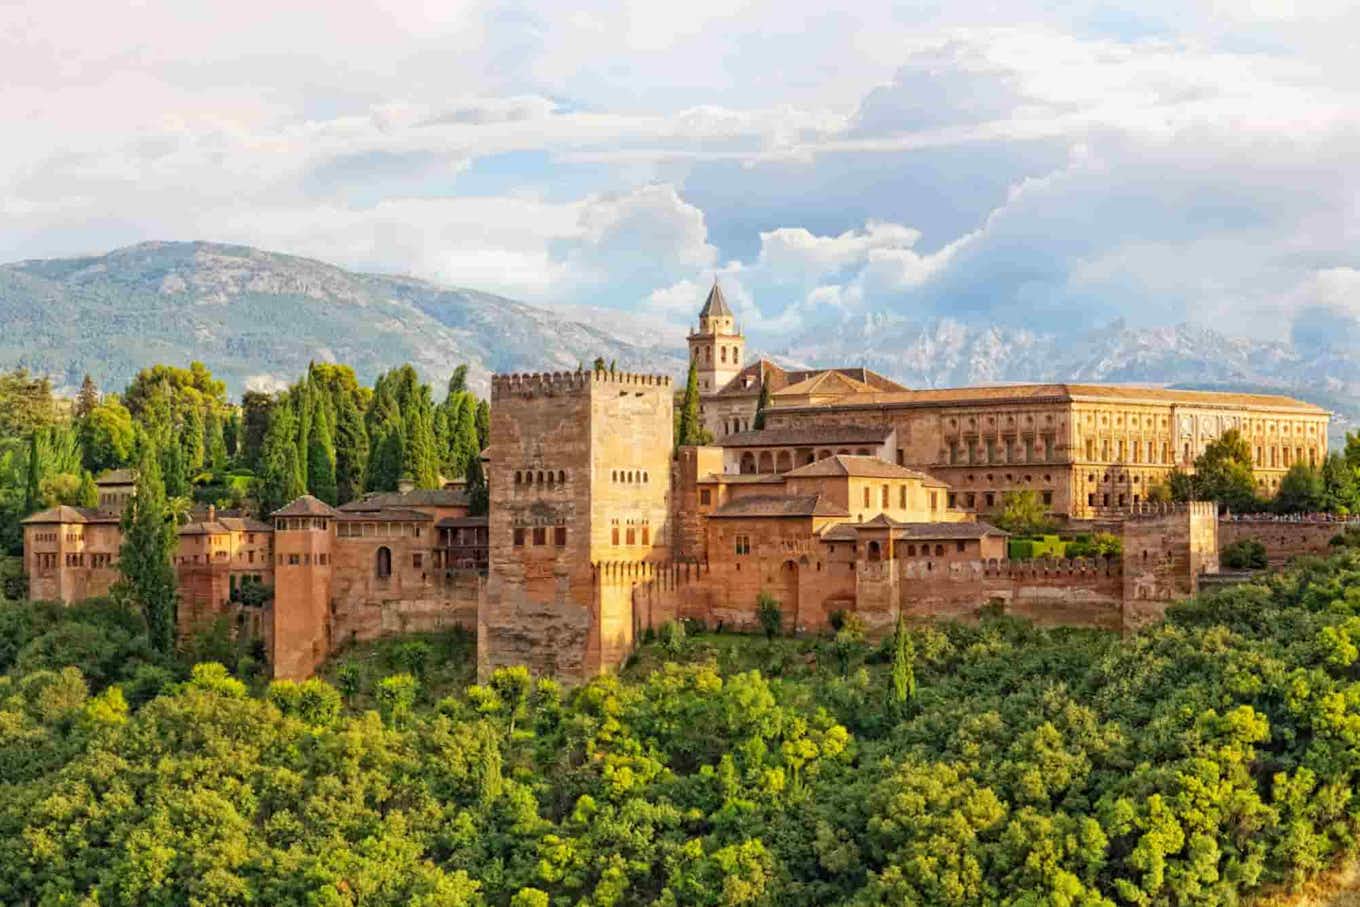 The Alhambra, the firts waypoint of this South Spain Road Trip